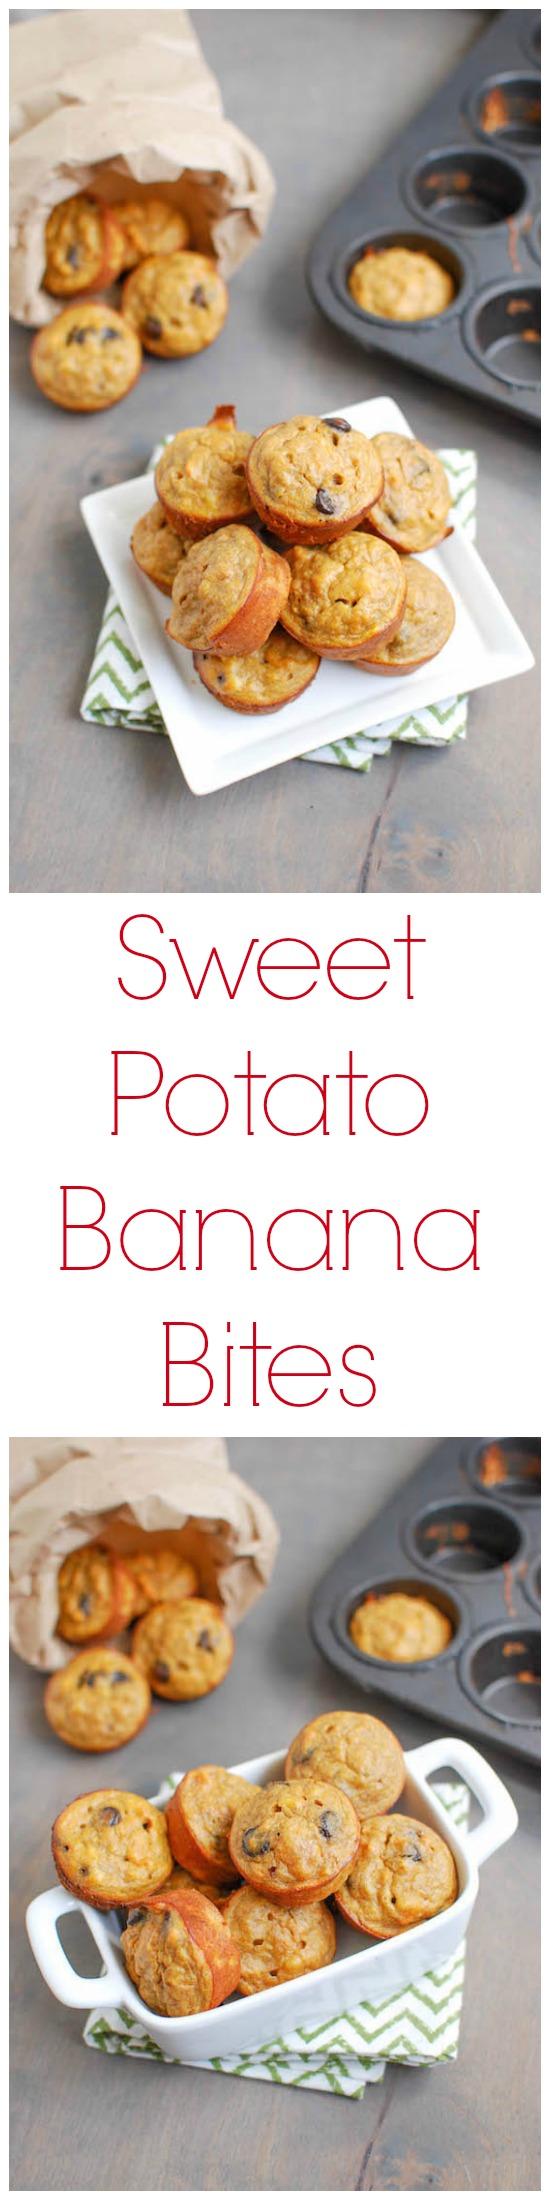 With just 4 main ingredients, these Sweet Potato Banana Bites are gluten-free and make the perfect snack for kids and adults!